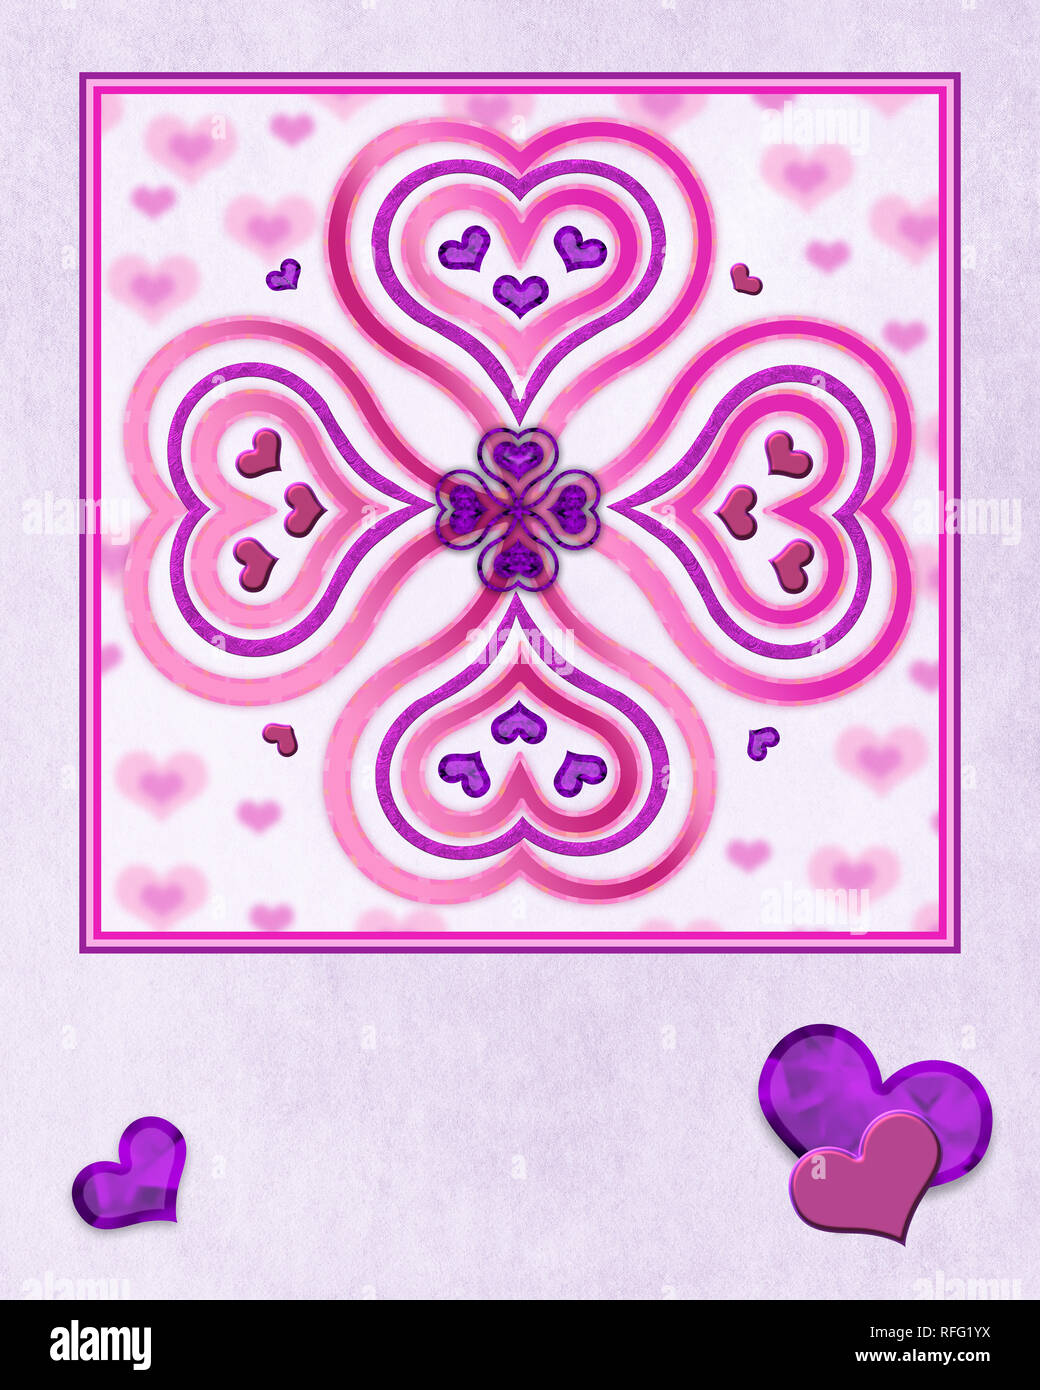 Graphic hearts illustration in shades of pink and purple hearts.  Abstract Valentine's Day Image. Stock Photo